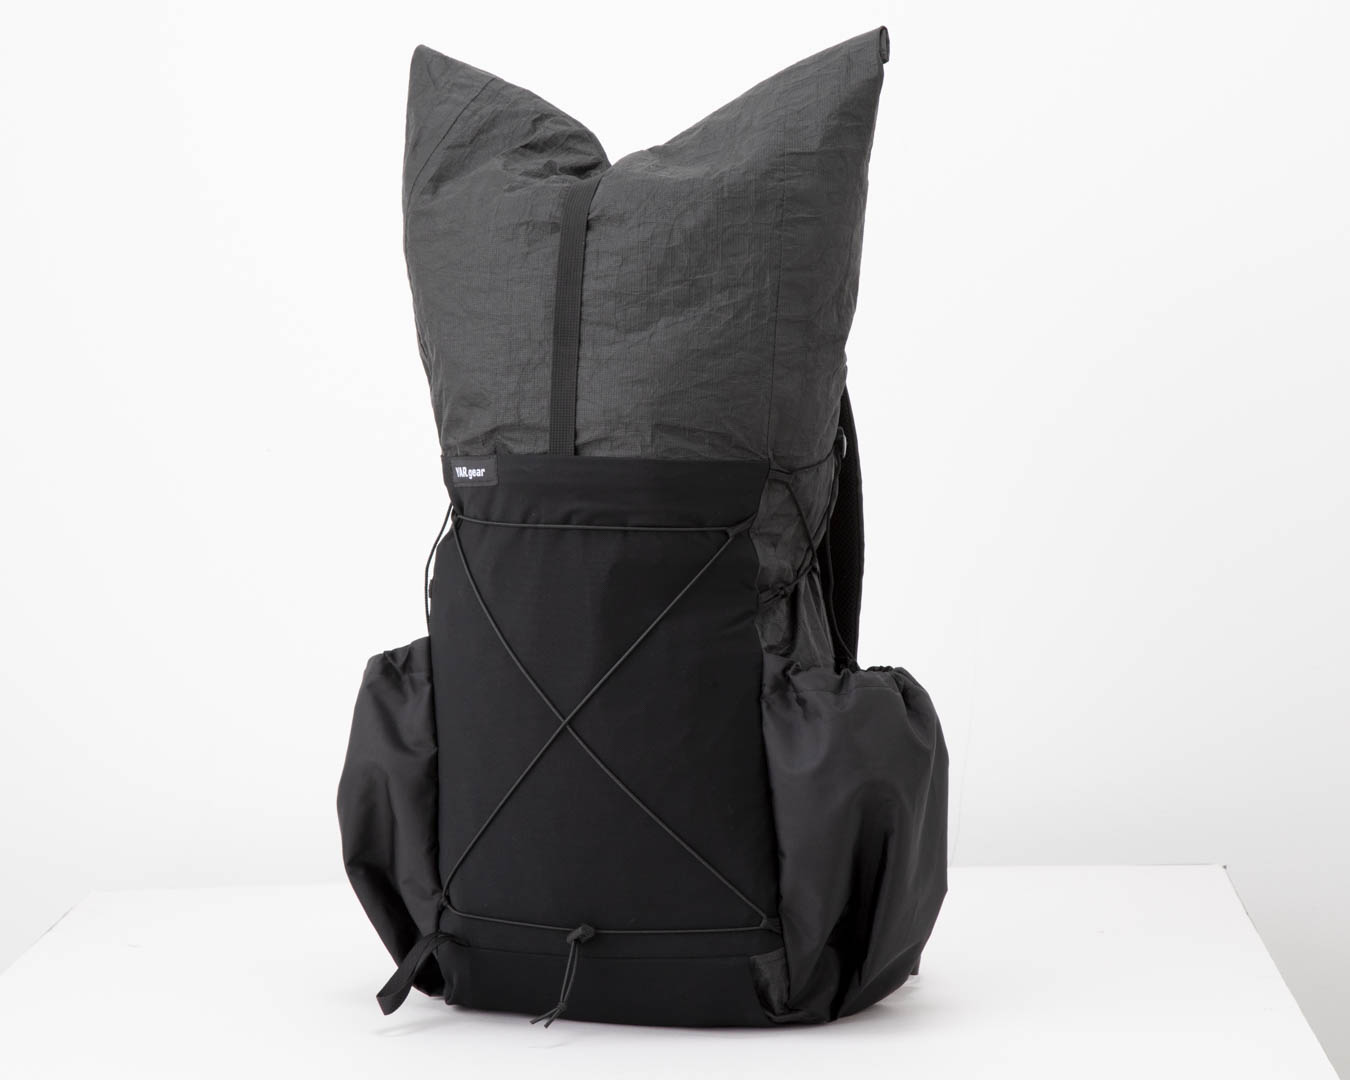 THE BACKPACK TEST 2023現行ULバックパック10種類を背負ってみた（前編 ...